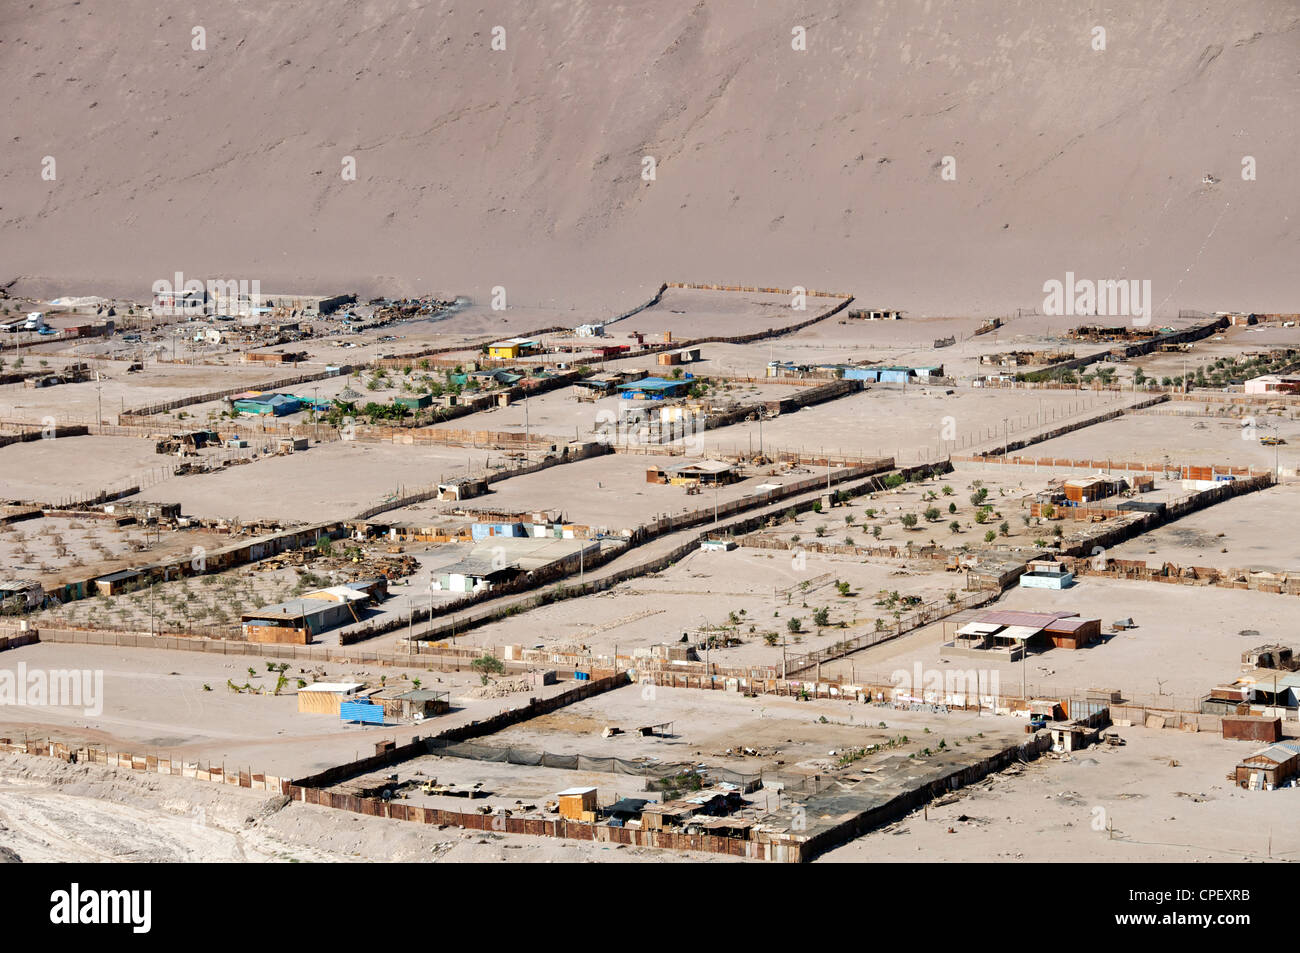 A desert village in the driest place on earth Atacama Desert Northern Chile Stock Photo